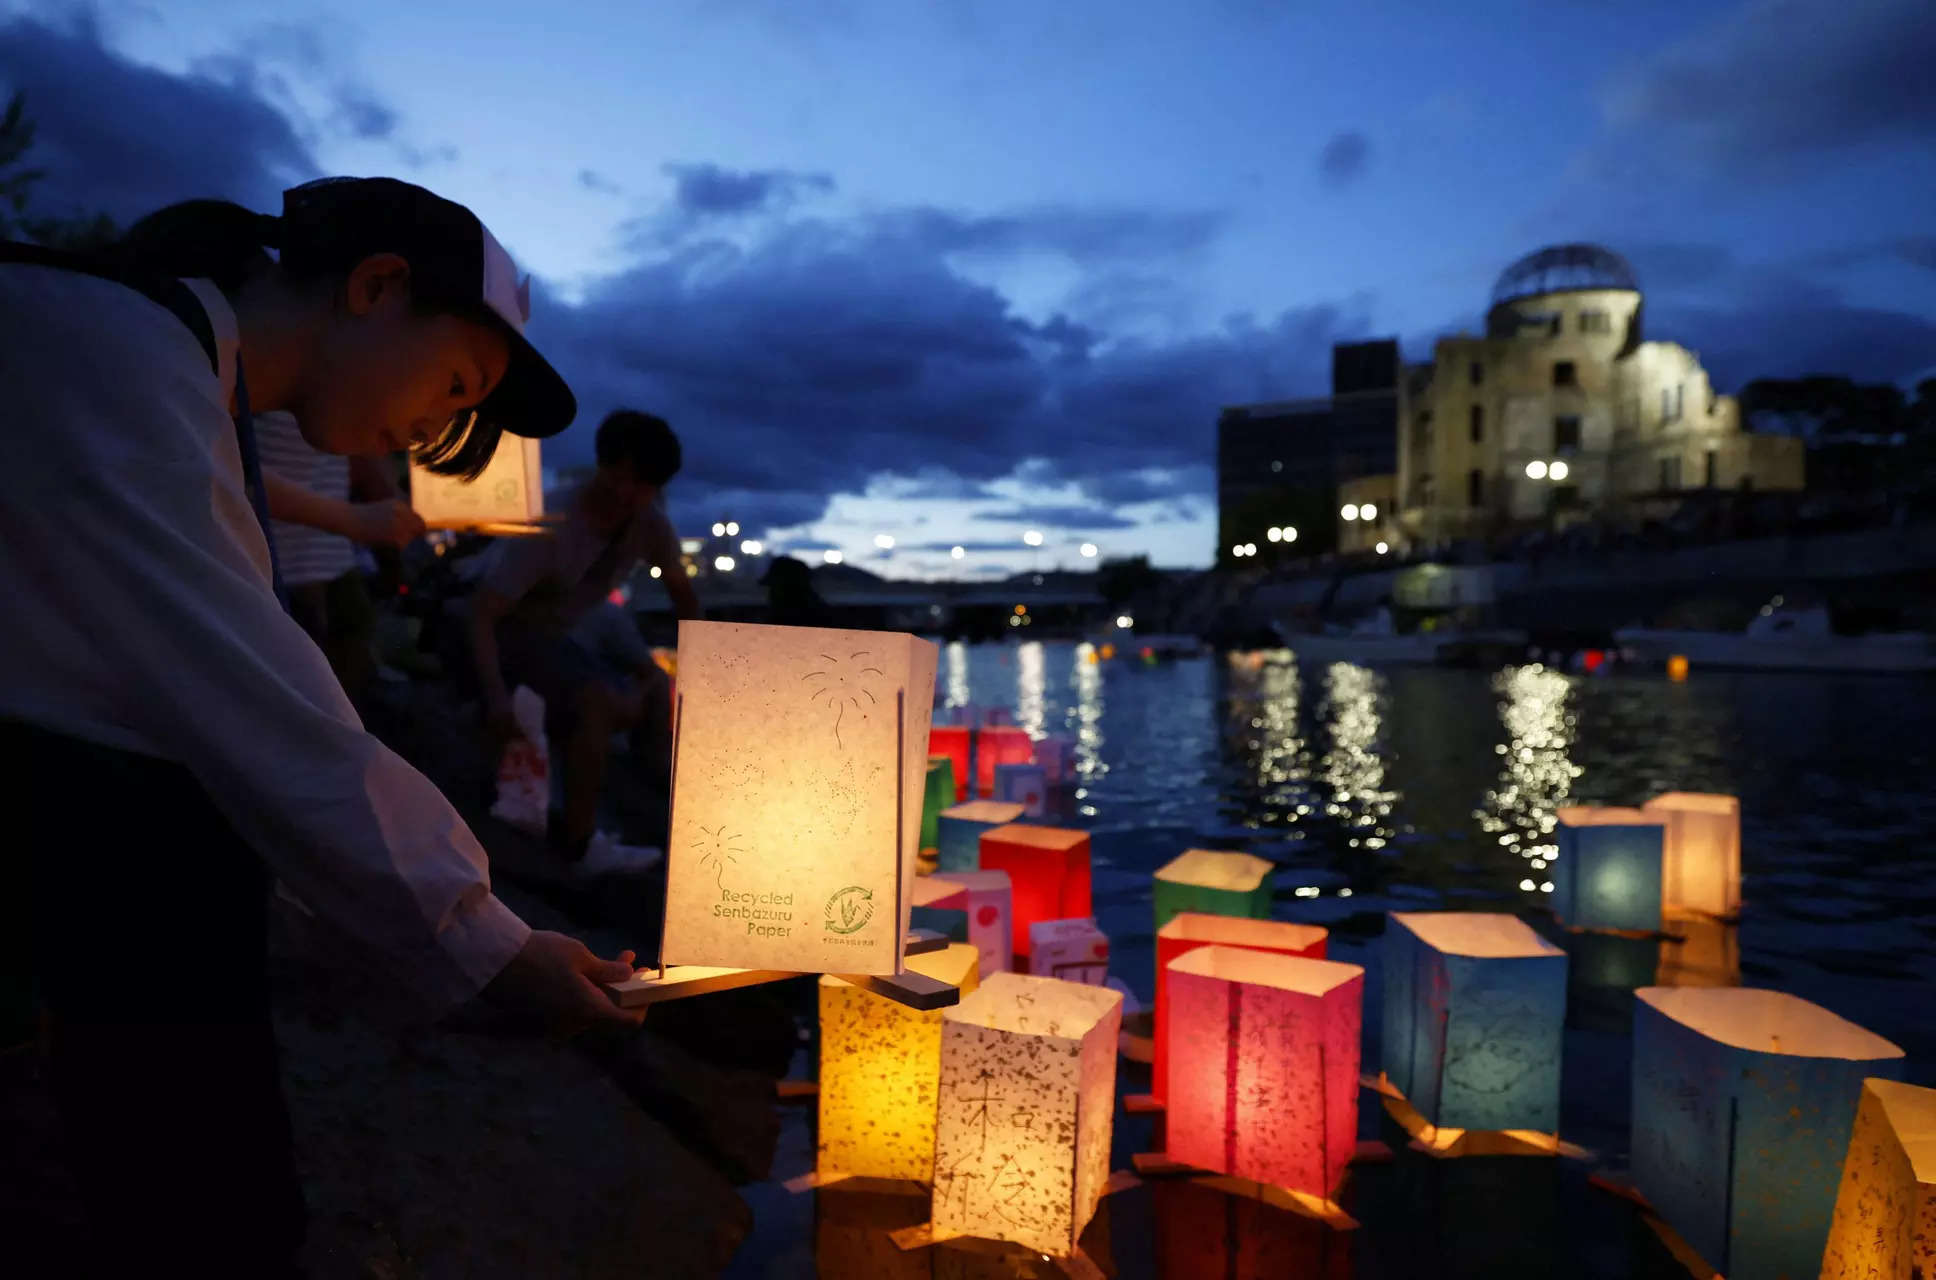 People release paper lanterns on the Motoyasu River facing the gutted Atomic Bomb Dome in remembrance of atomic bomb victims on an anniversary of the atomic bombing of the city in Hiroshima 